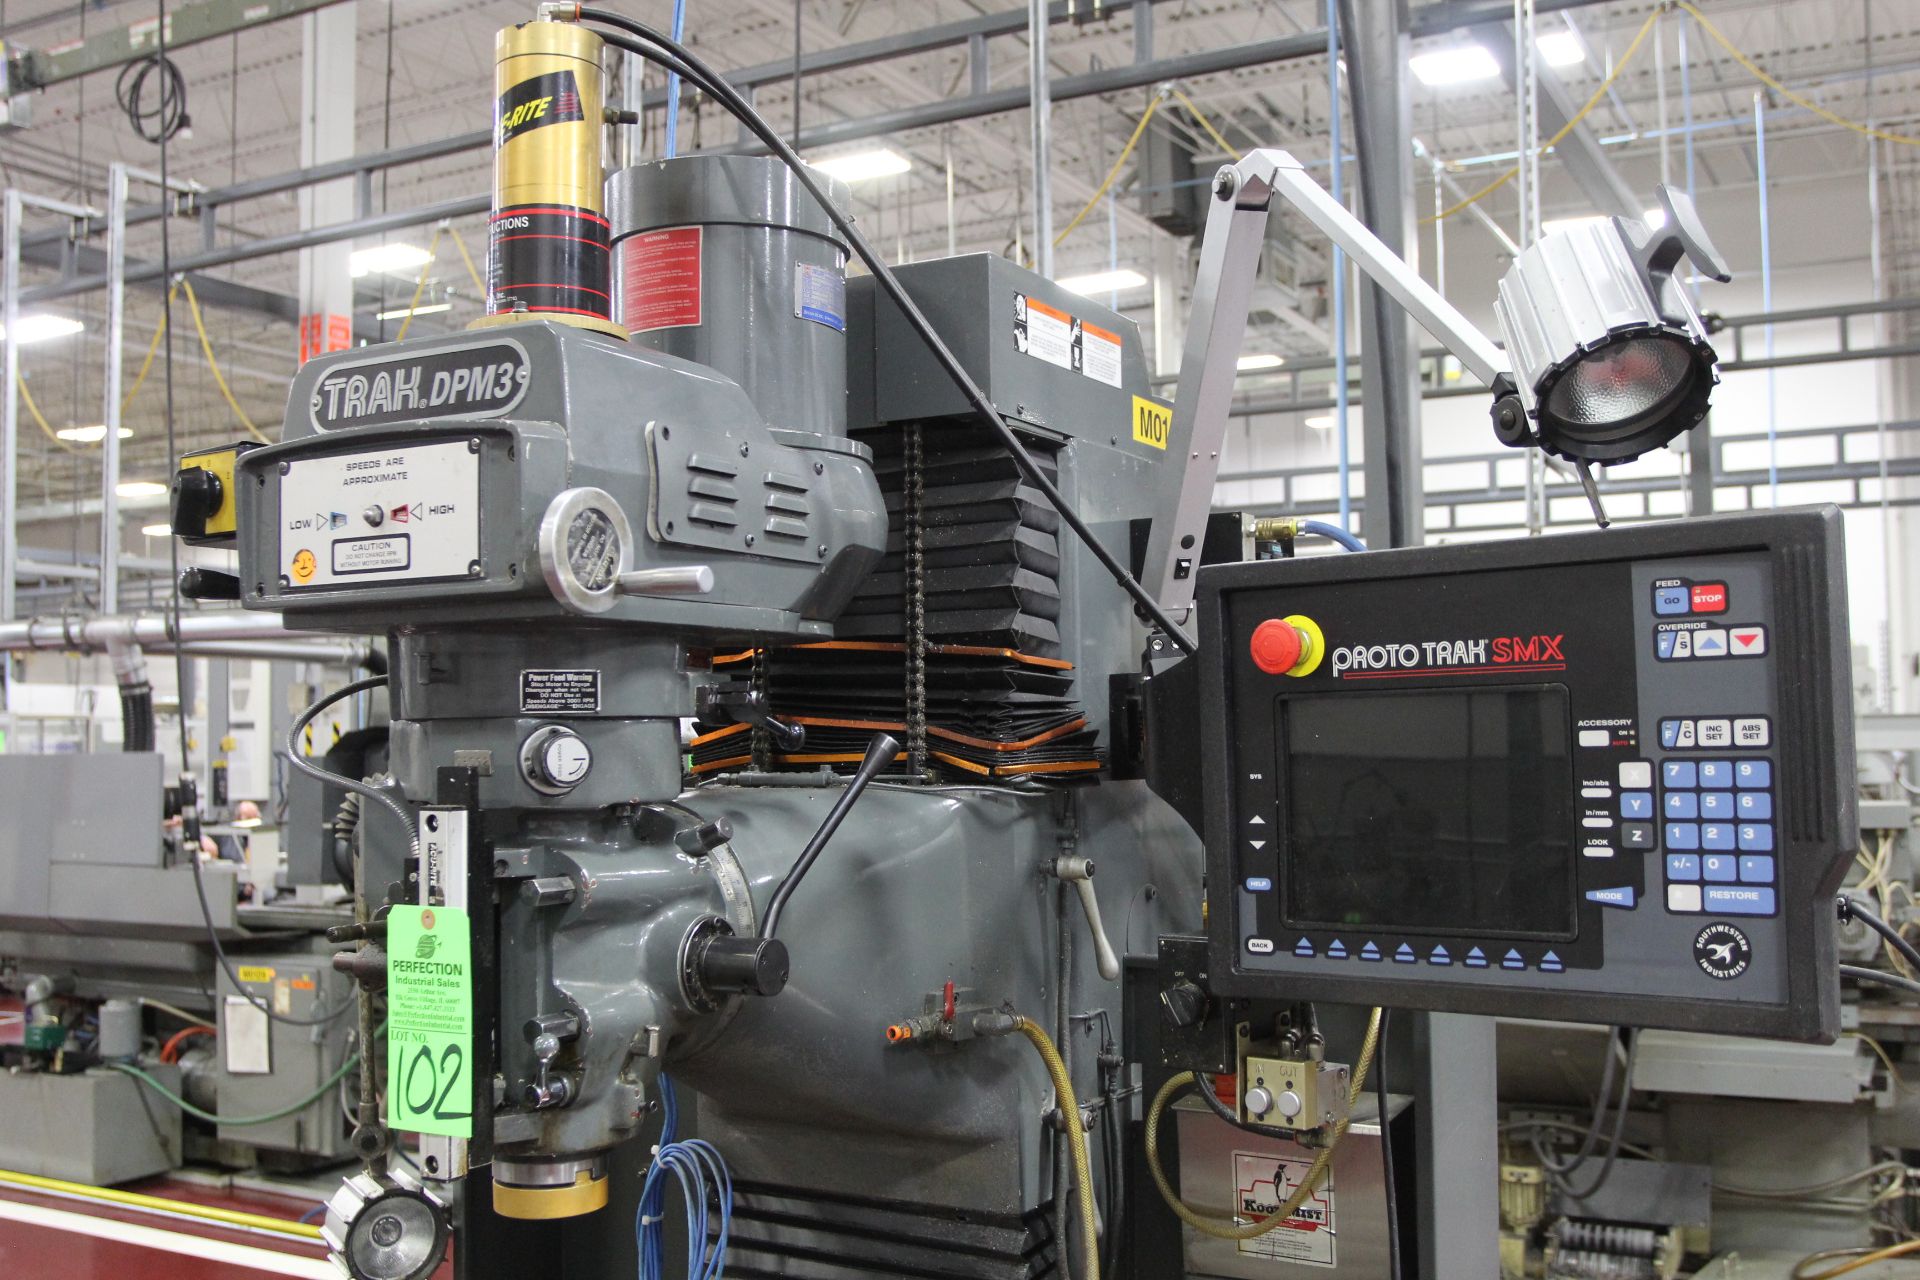 TRAK DPM3 3 hp Vertical Mill, s/n 05-CF13916, w/ PROTO TRAK SMX 3 Axis Control, 3 Axis Power Feed - Image 3 of 4